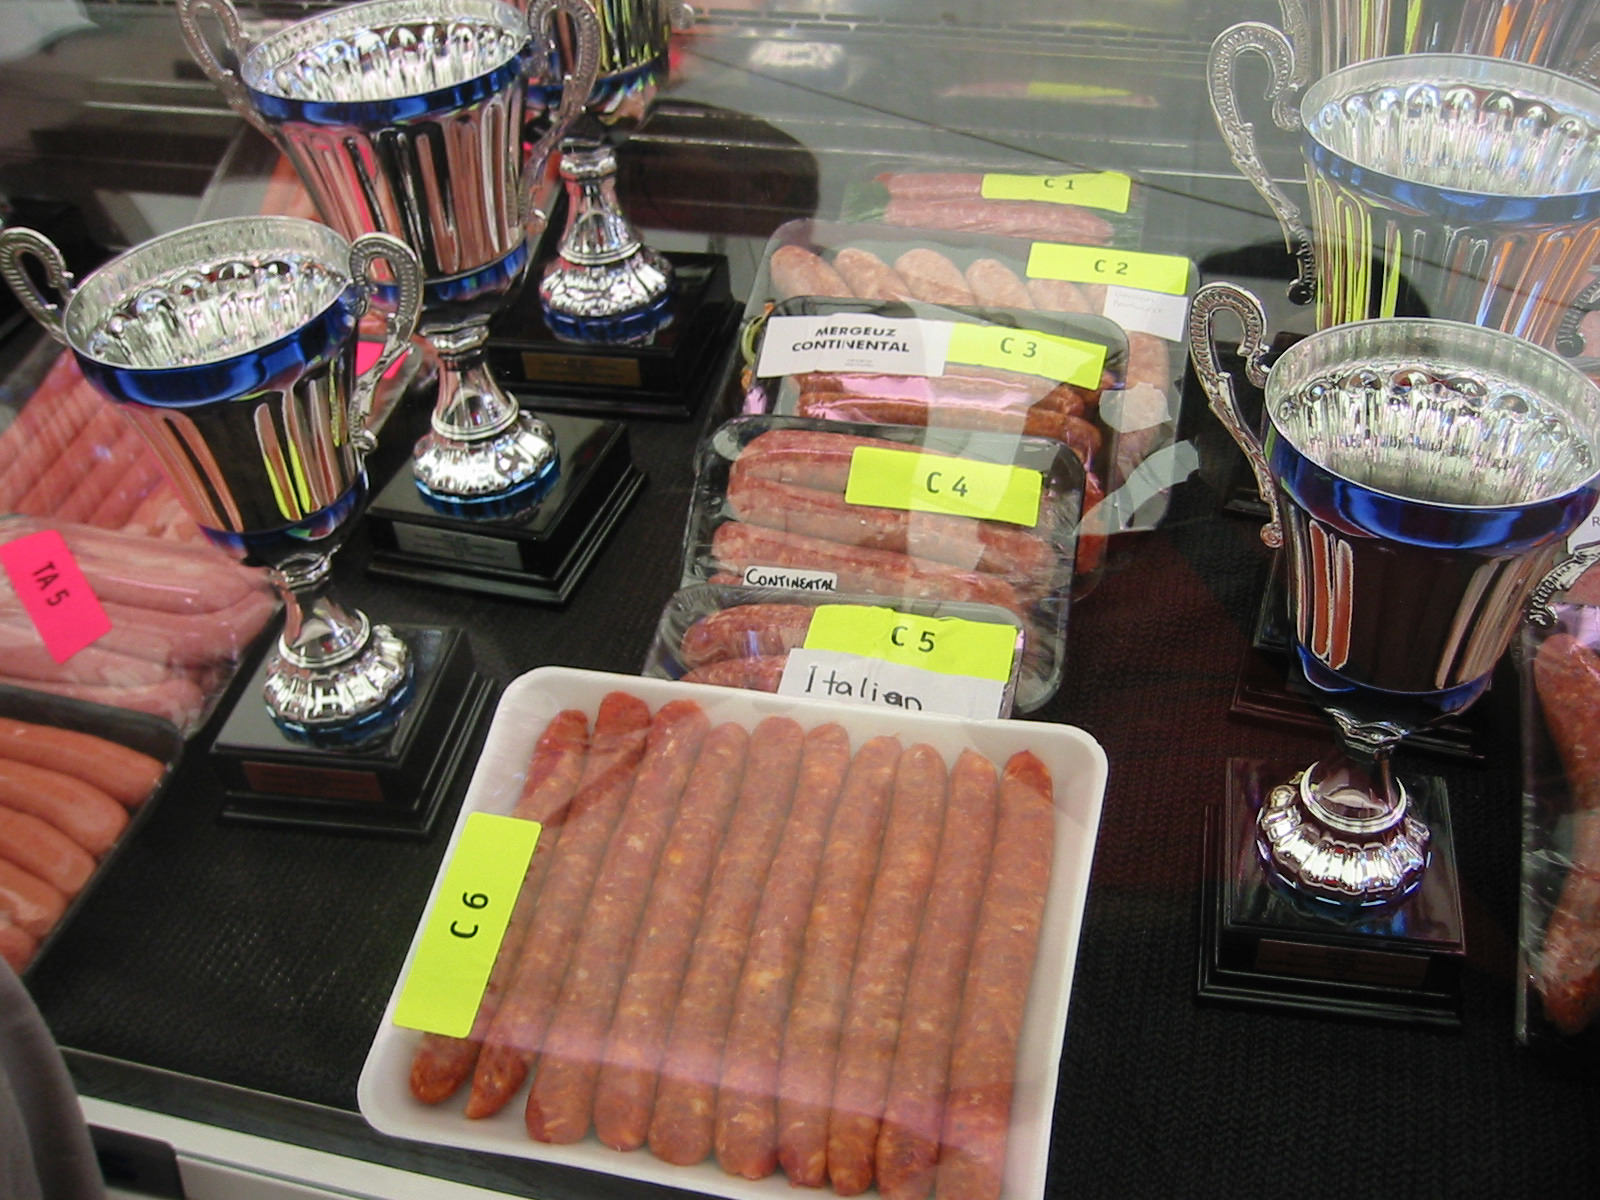 Sausages and trophies